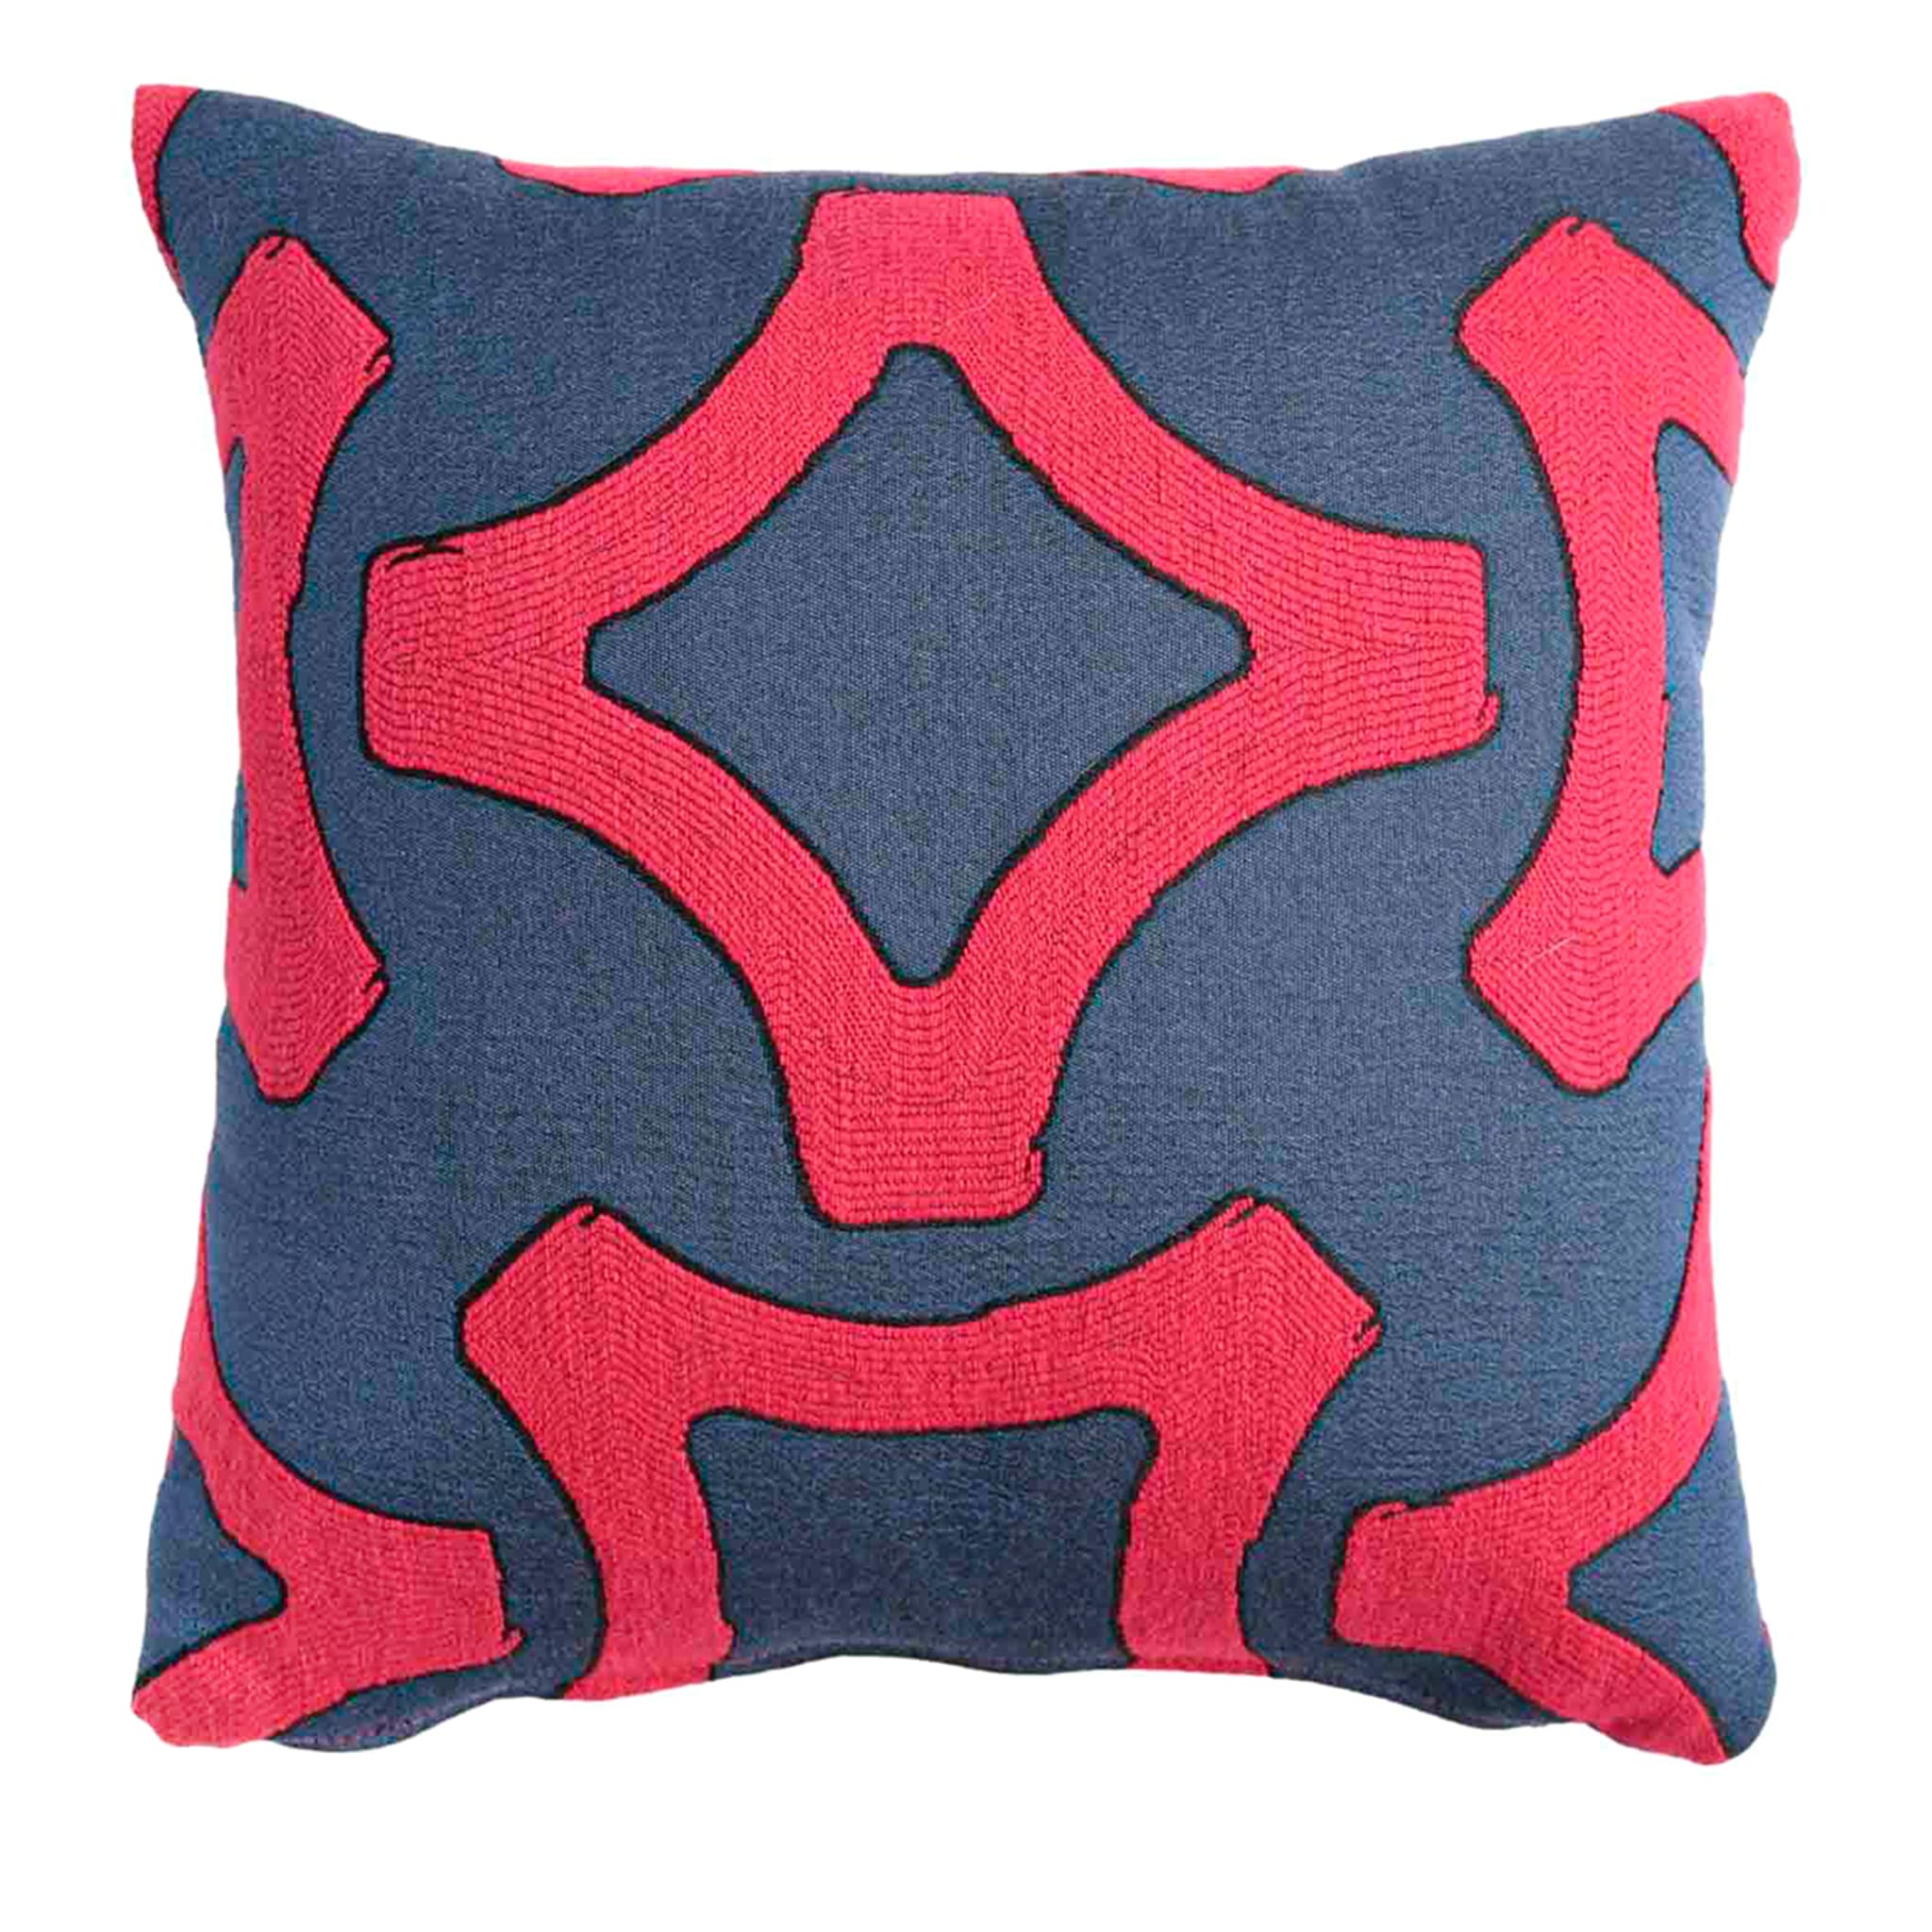 Carrè Large Patterned Blue and Fuchsia Square Cushion - Main view